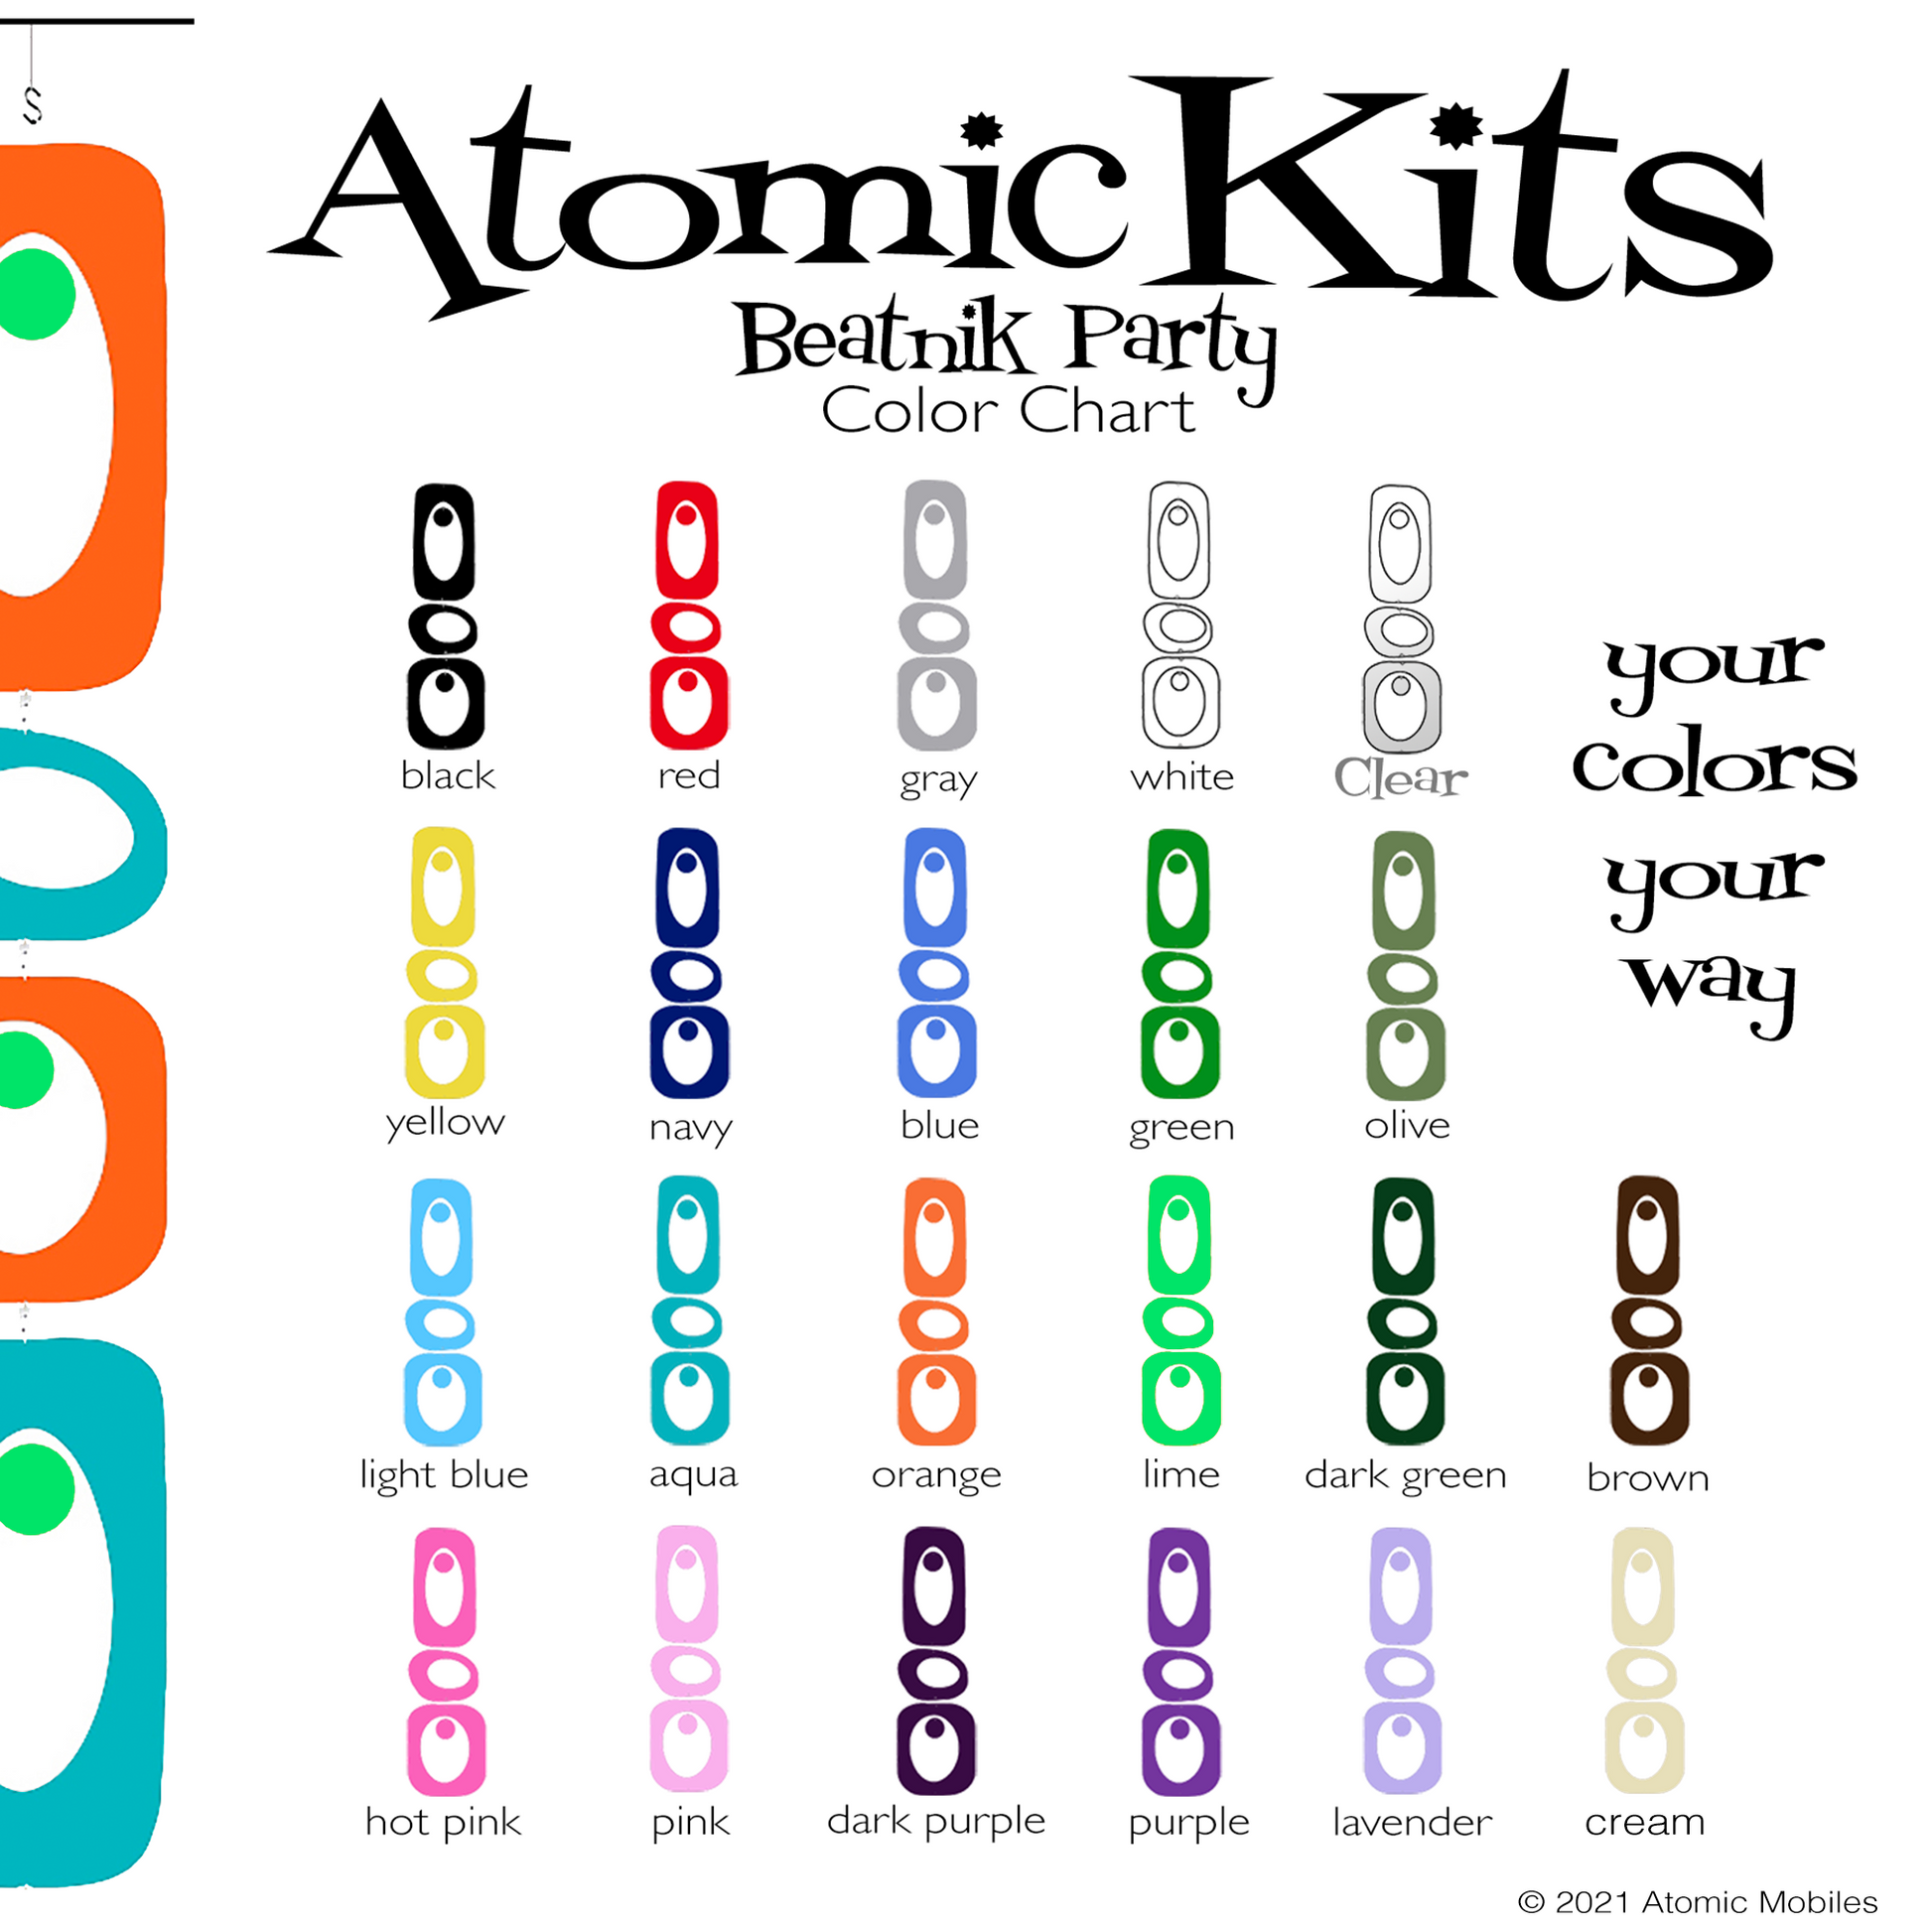 Beatnik Party Color Chart for Atomic Mobiles and Room Divider Kits by AtomicMobiles.com